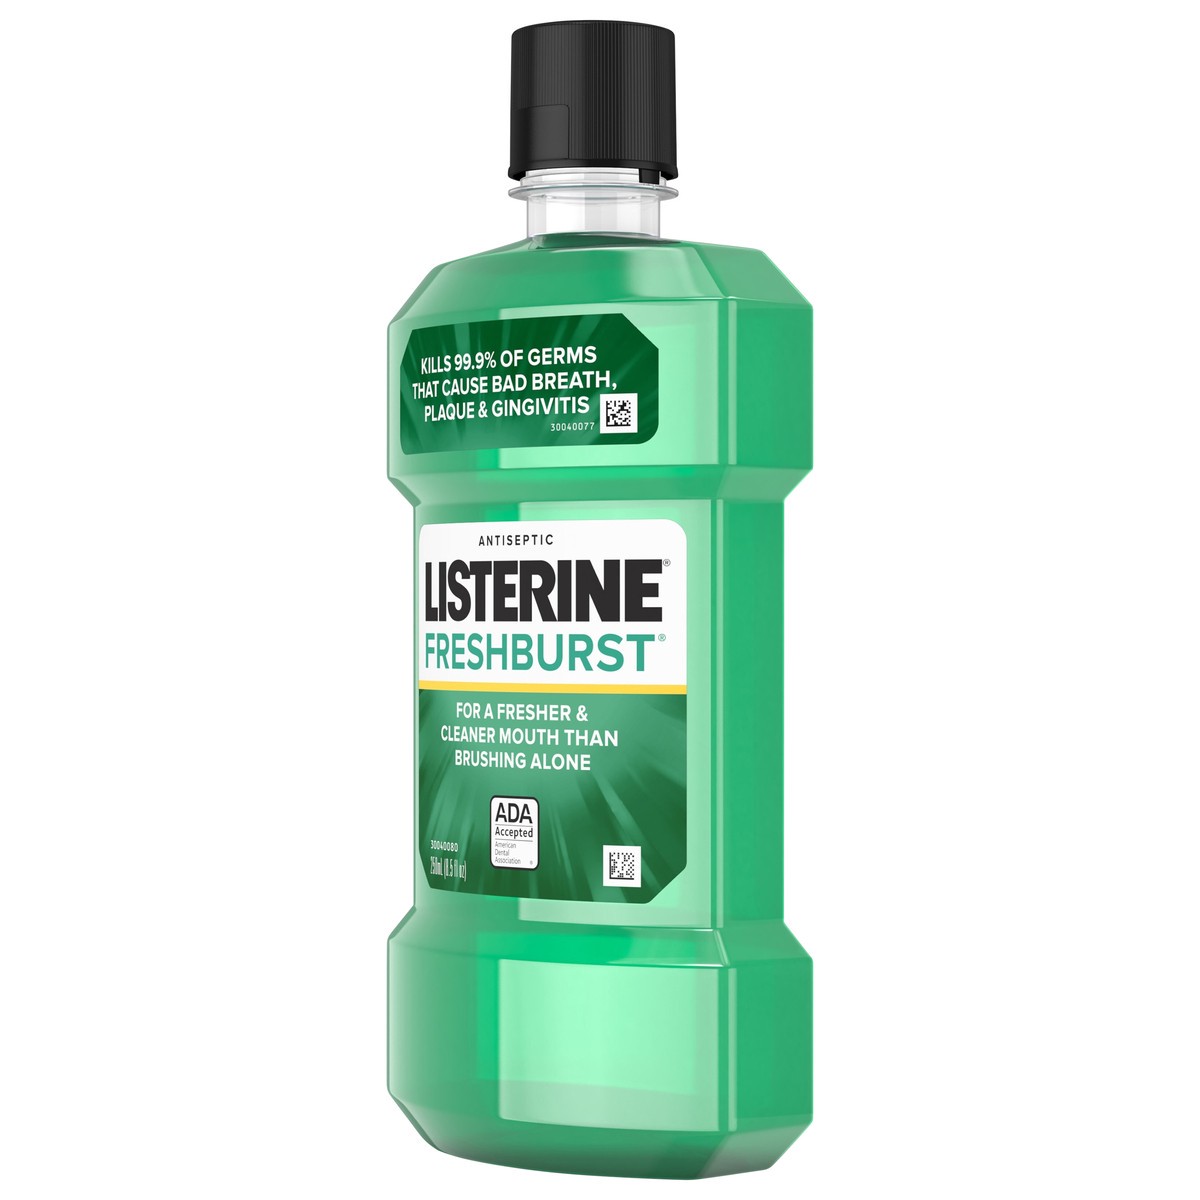 slide 3 of 7, Listerine Freshburst Antiseptic Mouthwash for Bad Breath, Kills 99% of Germs that Cause Bad Breath & Fight Plaque & Gingivitis, ADA Accepted Mouthwash, Spearmint, 250 ml